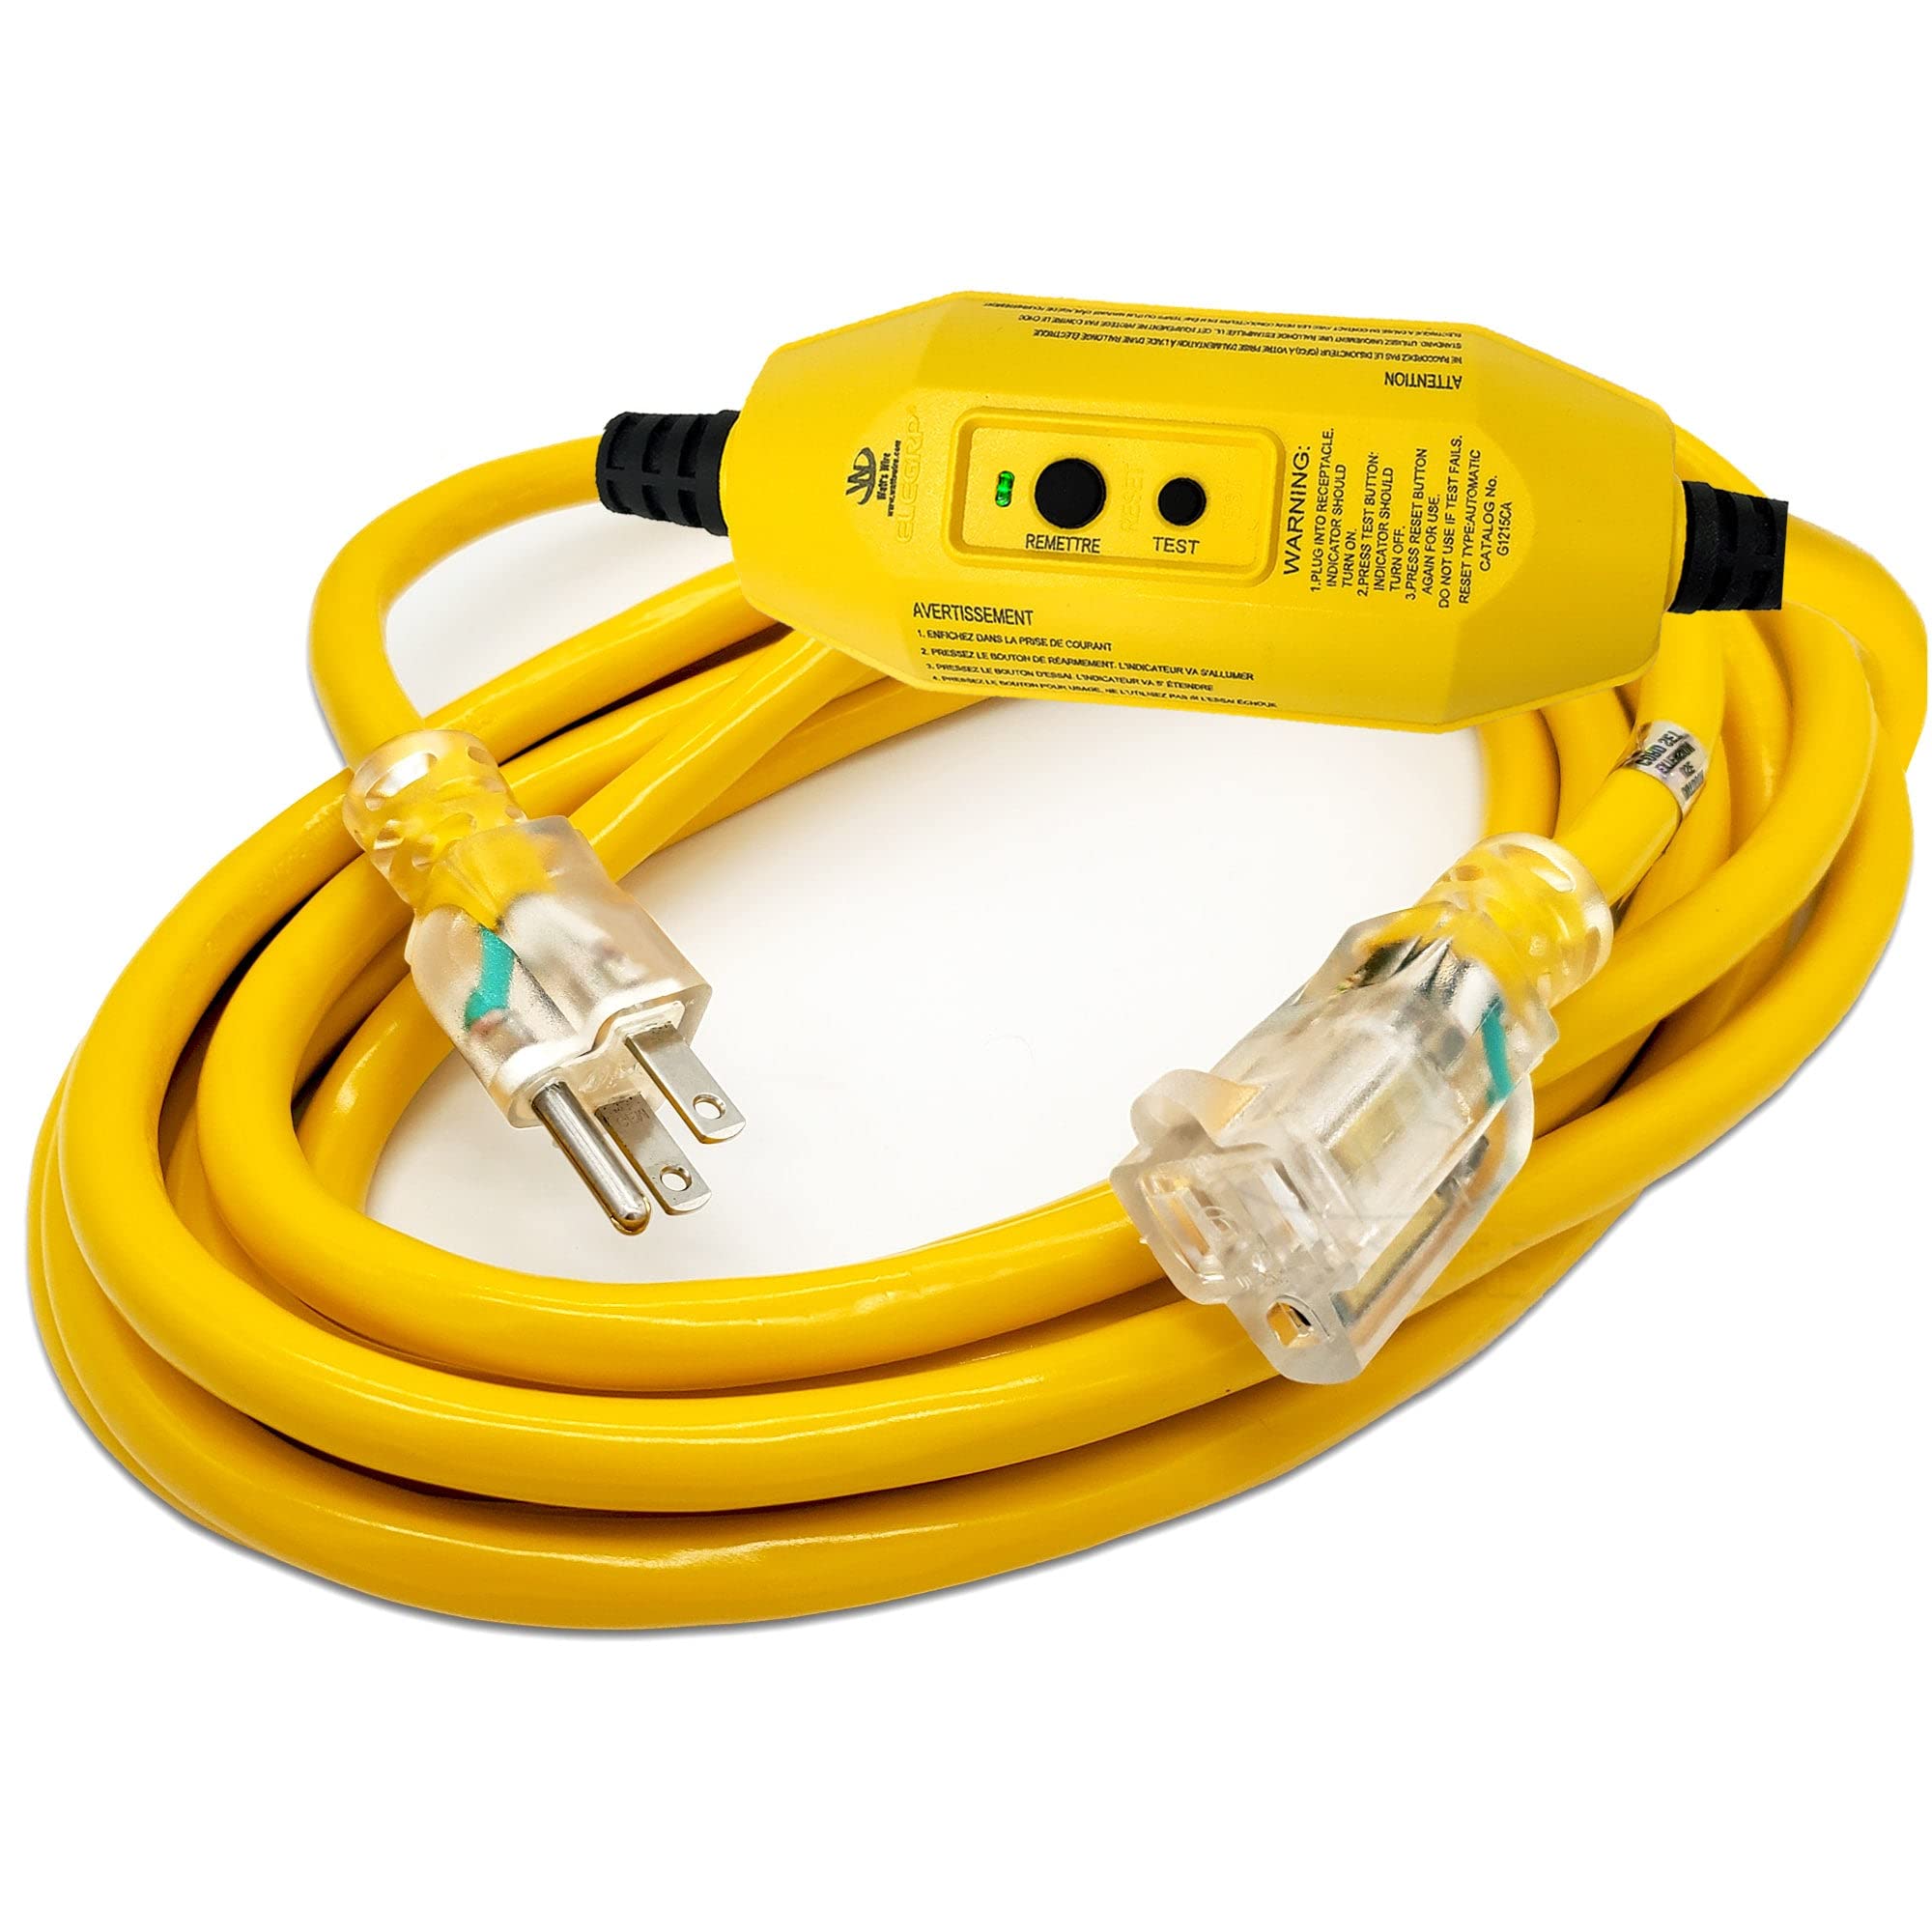 15 ft - GFCI 12 Gauge Heavy Duty SJTW Indoor/Outdoor Yellow Extension Cord by Watt's Wire - 15' 12-Gauge Grounded 15-Amp GFI Power-Cord (15 Foot 12-Awg Yellow GFCI)